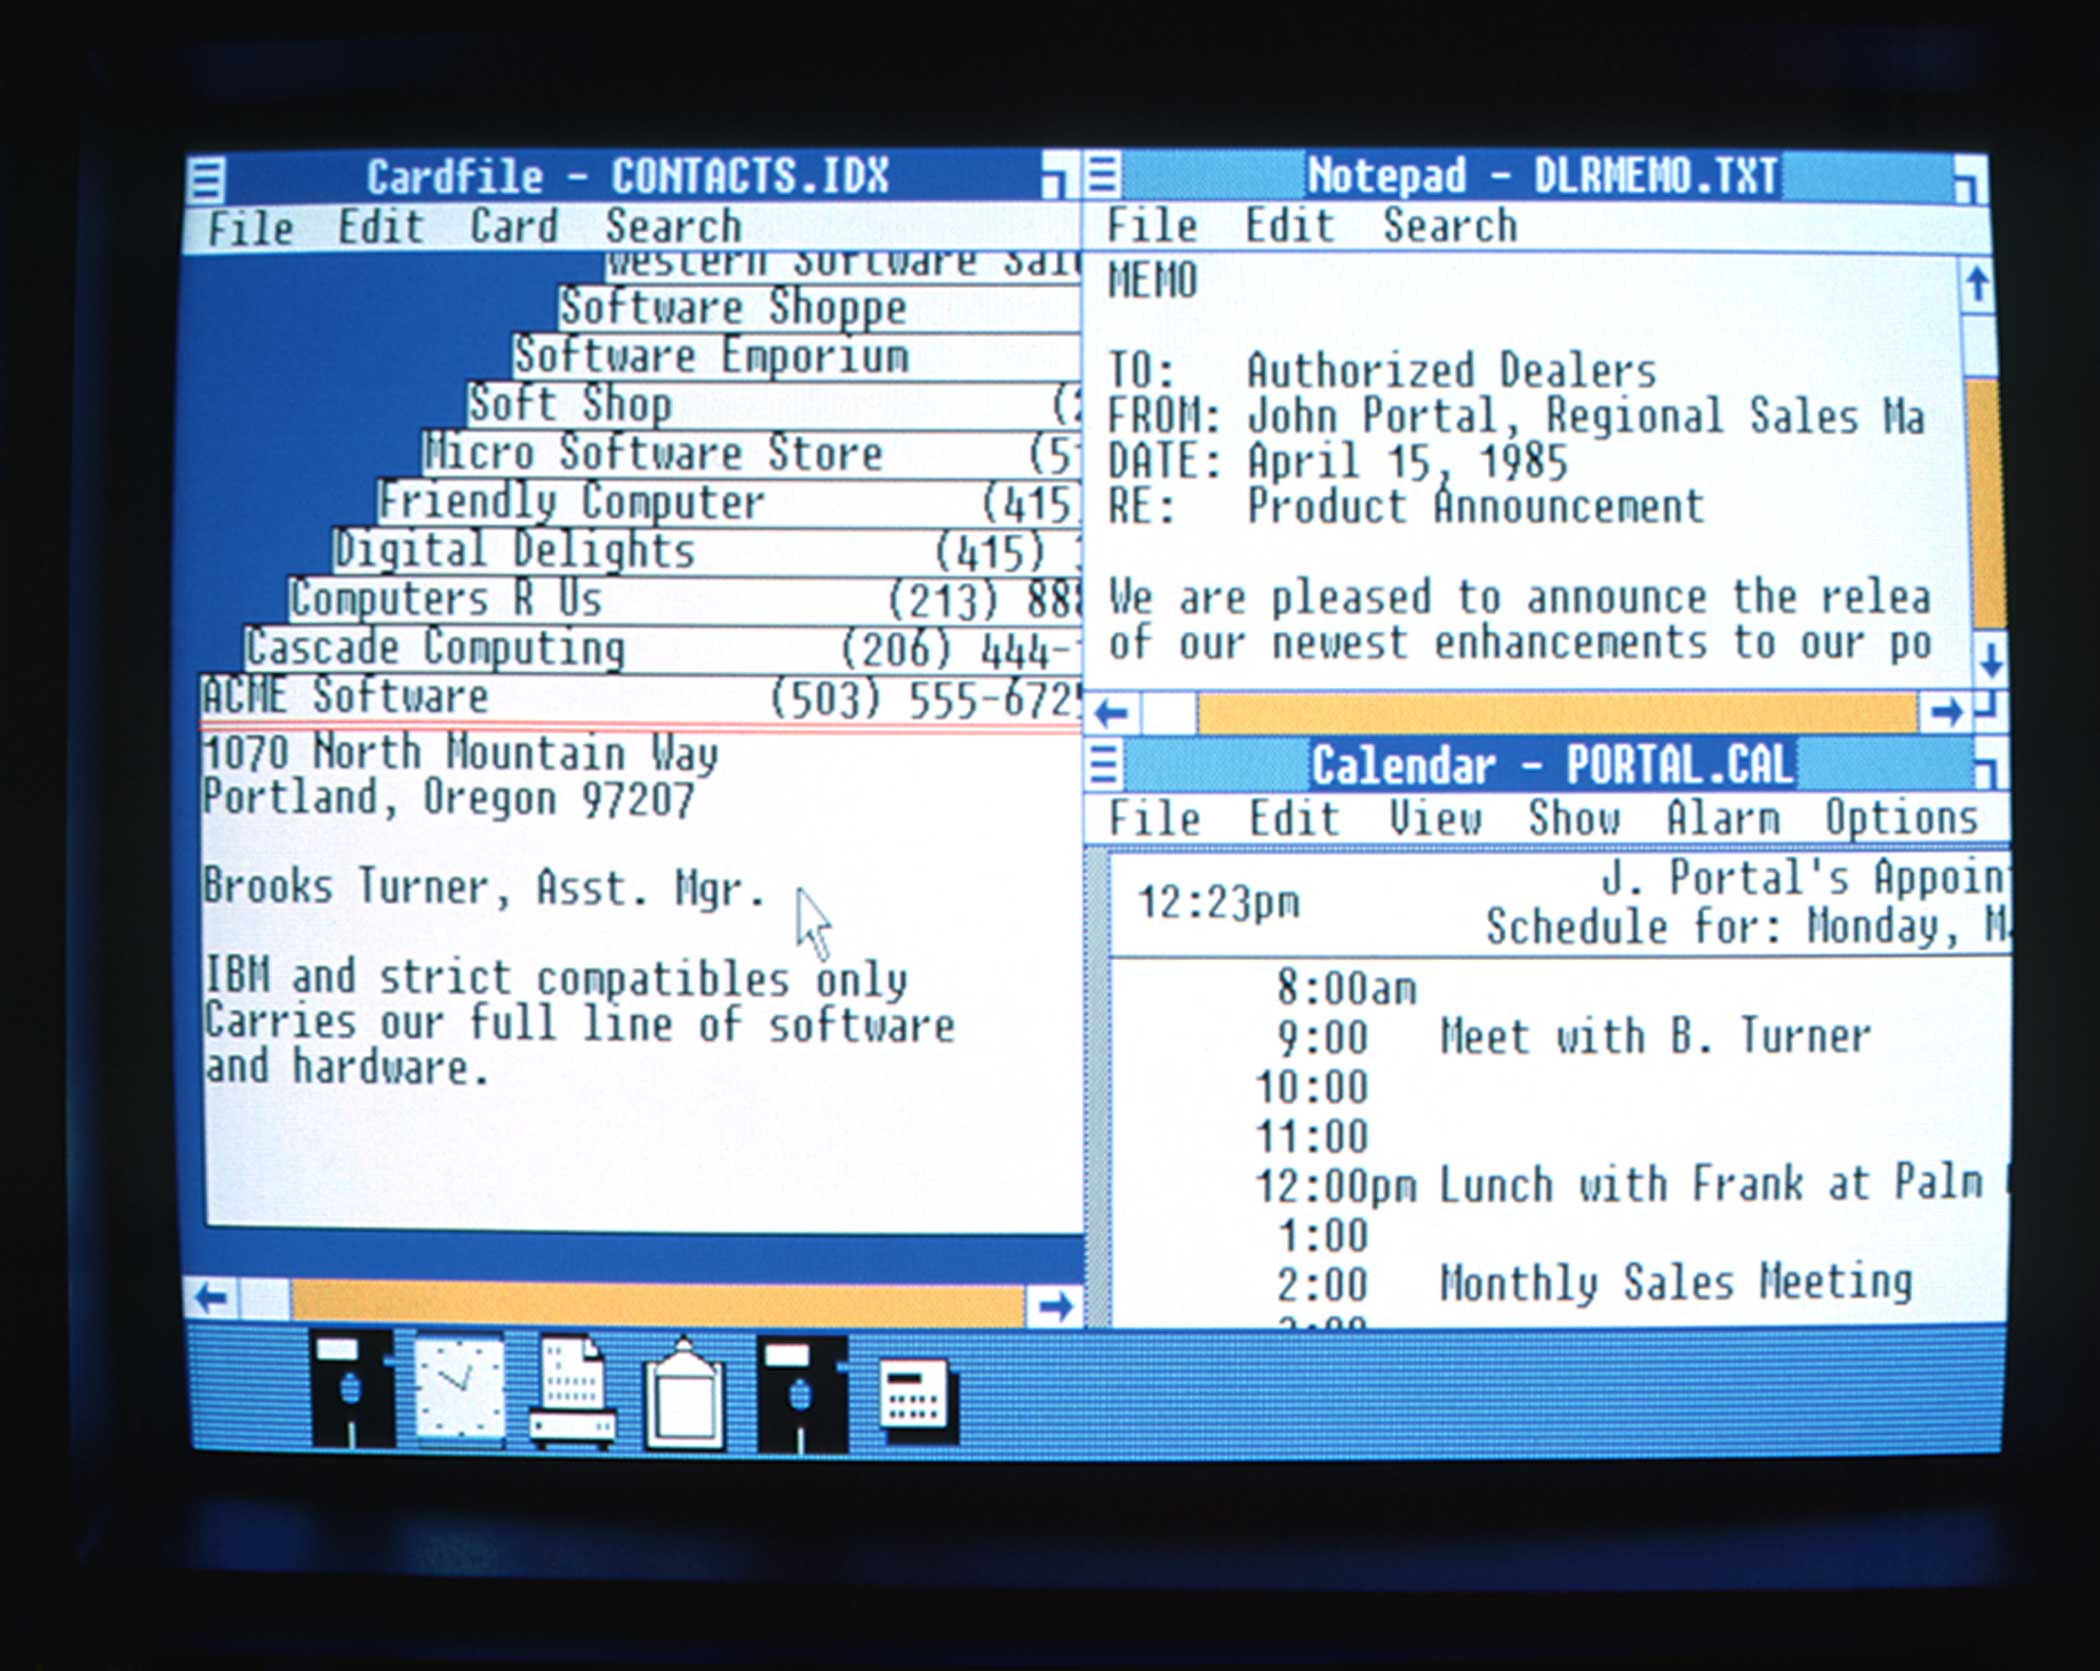 Windows 1.0 The seminal version of Windows released on November 20, 1985. Users could run programs in multiple windows simultaneously, sparing them the nuisance of quitting one application before launching another one.